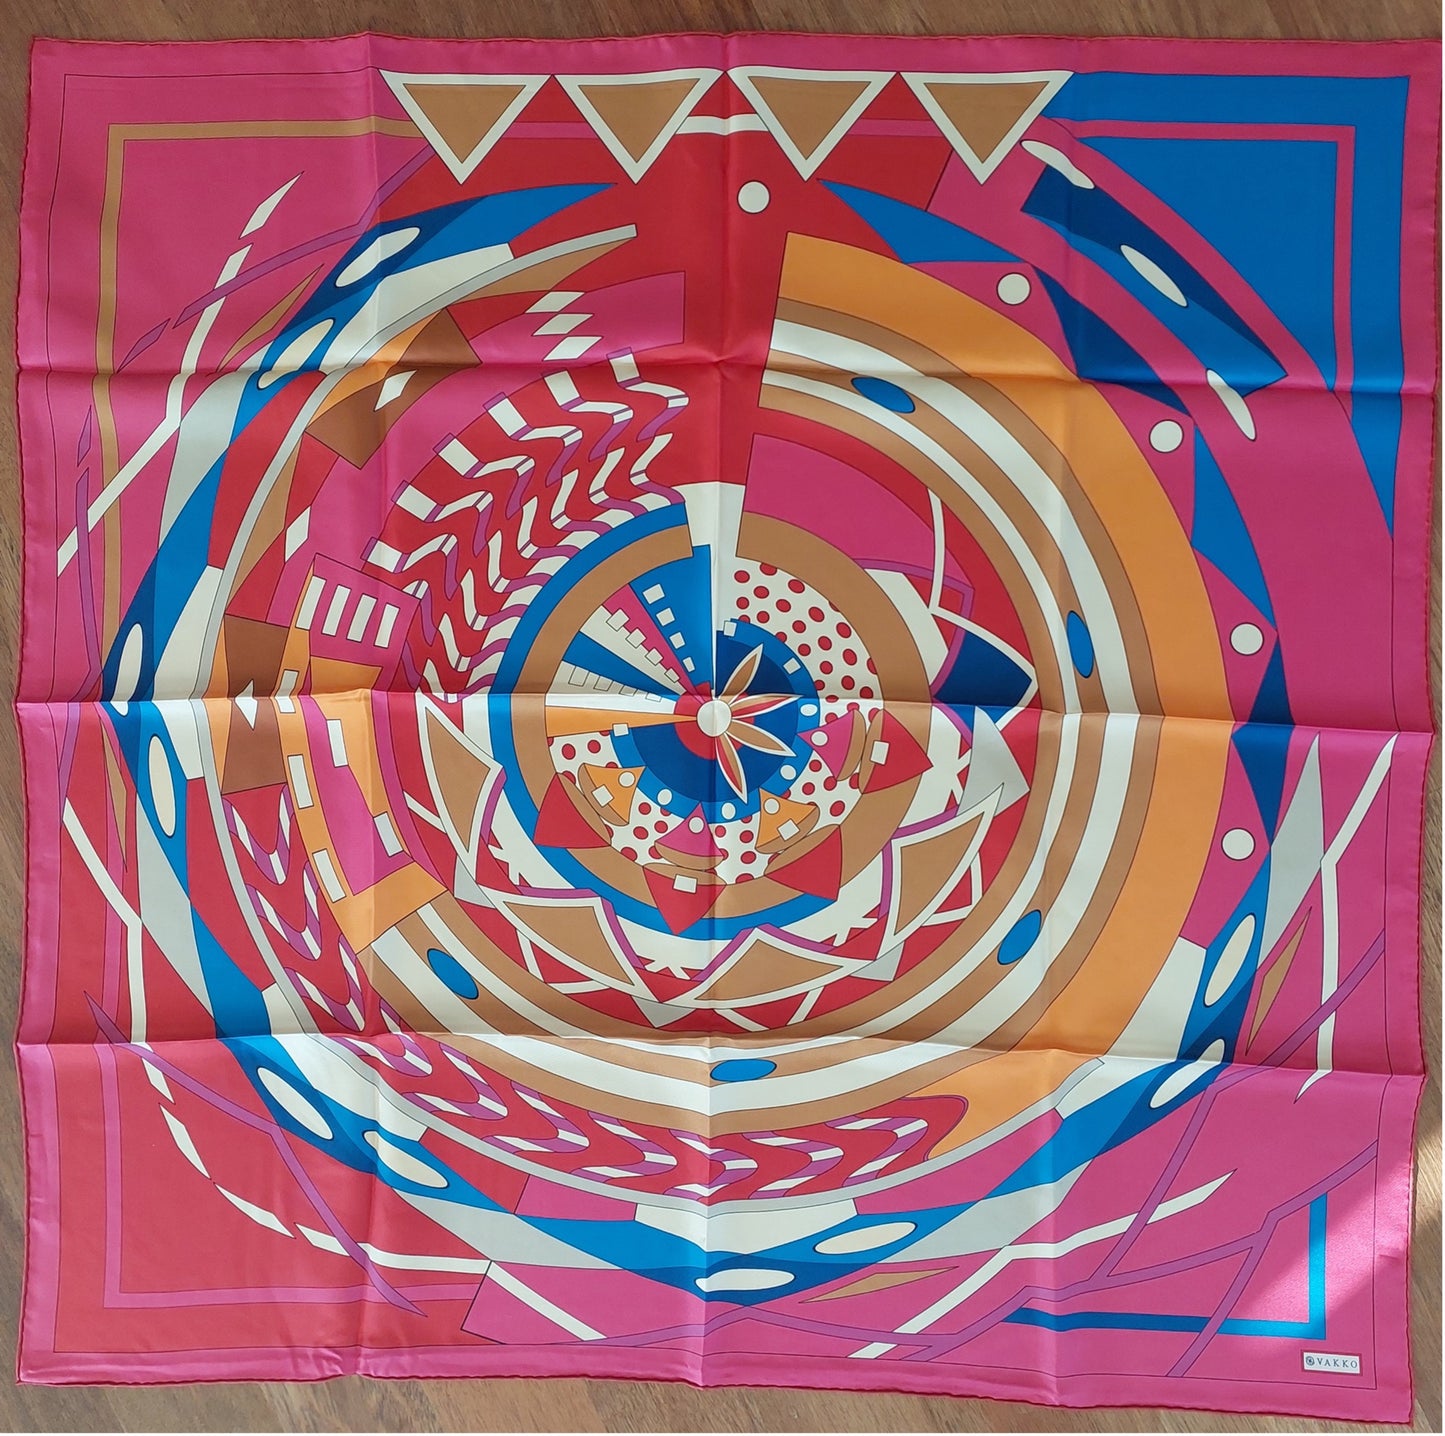 Woman 100% Silk Scarf Geometric design Circles Fuchsia Red Blue Colours Hand Rolled Edges Designer Style Great Gift for Her in a box